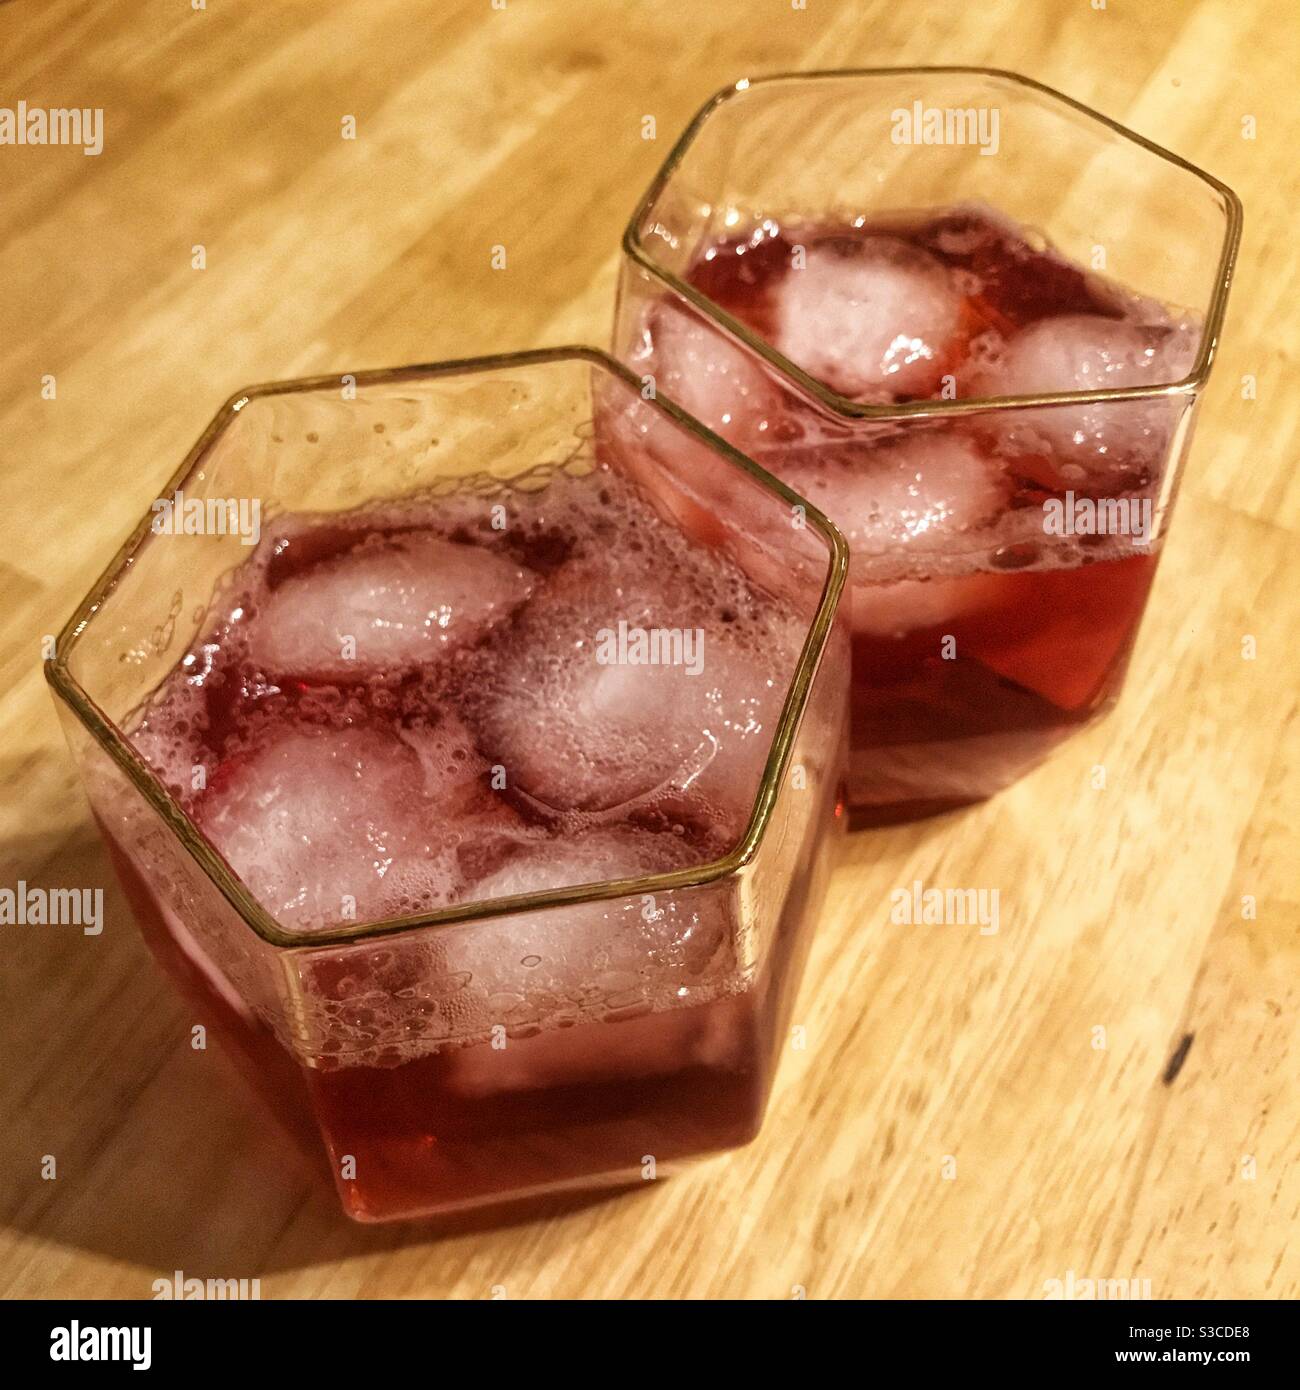 Sloe gin and ginger ale cocktails. Stock Photo